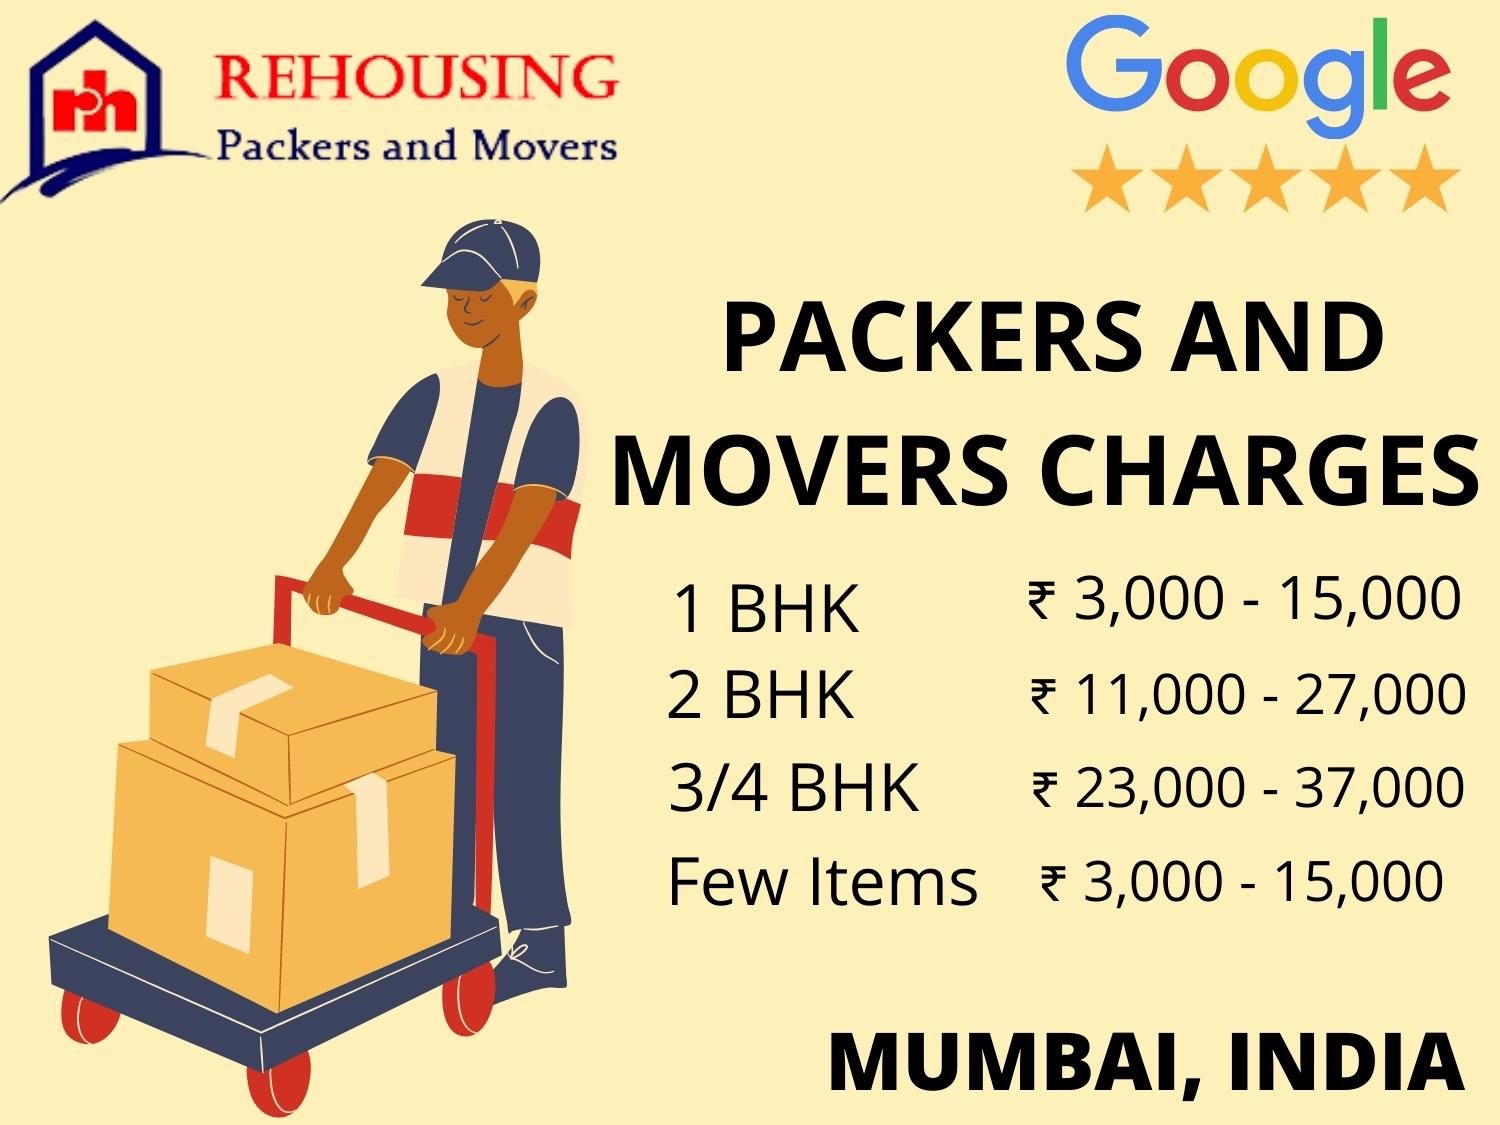 Rehousing packers and movers is one of India's most well-known international transport services providers in Mumbai.